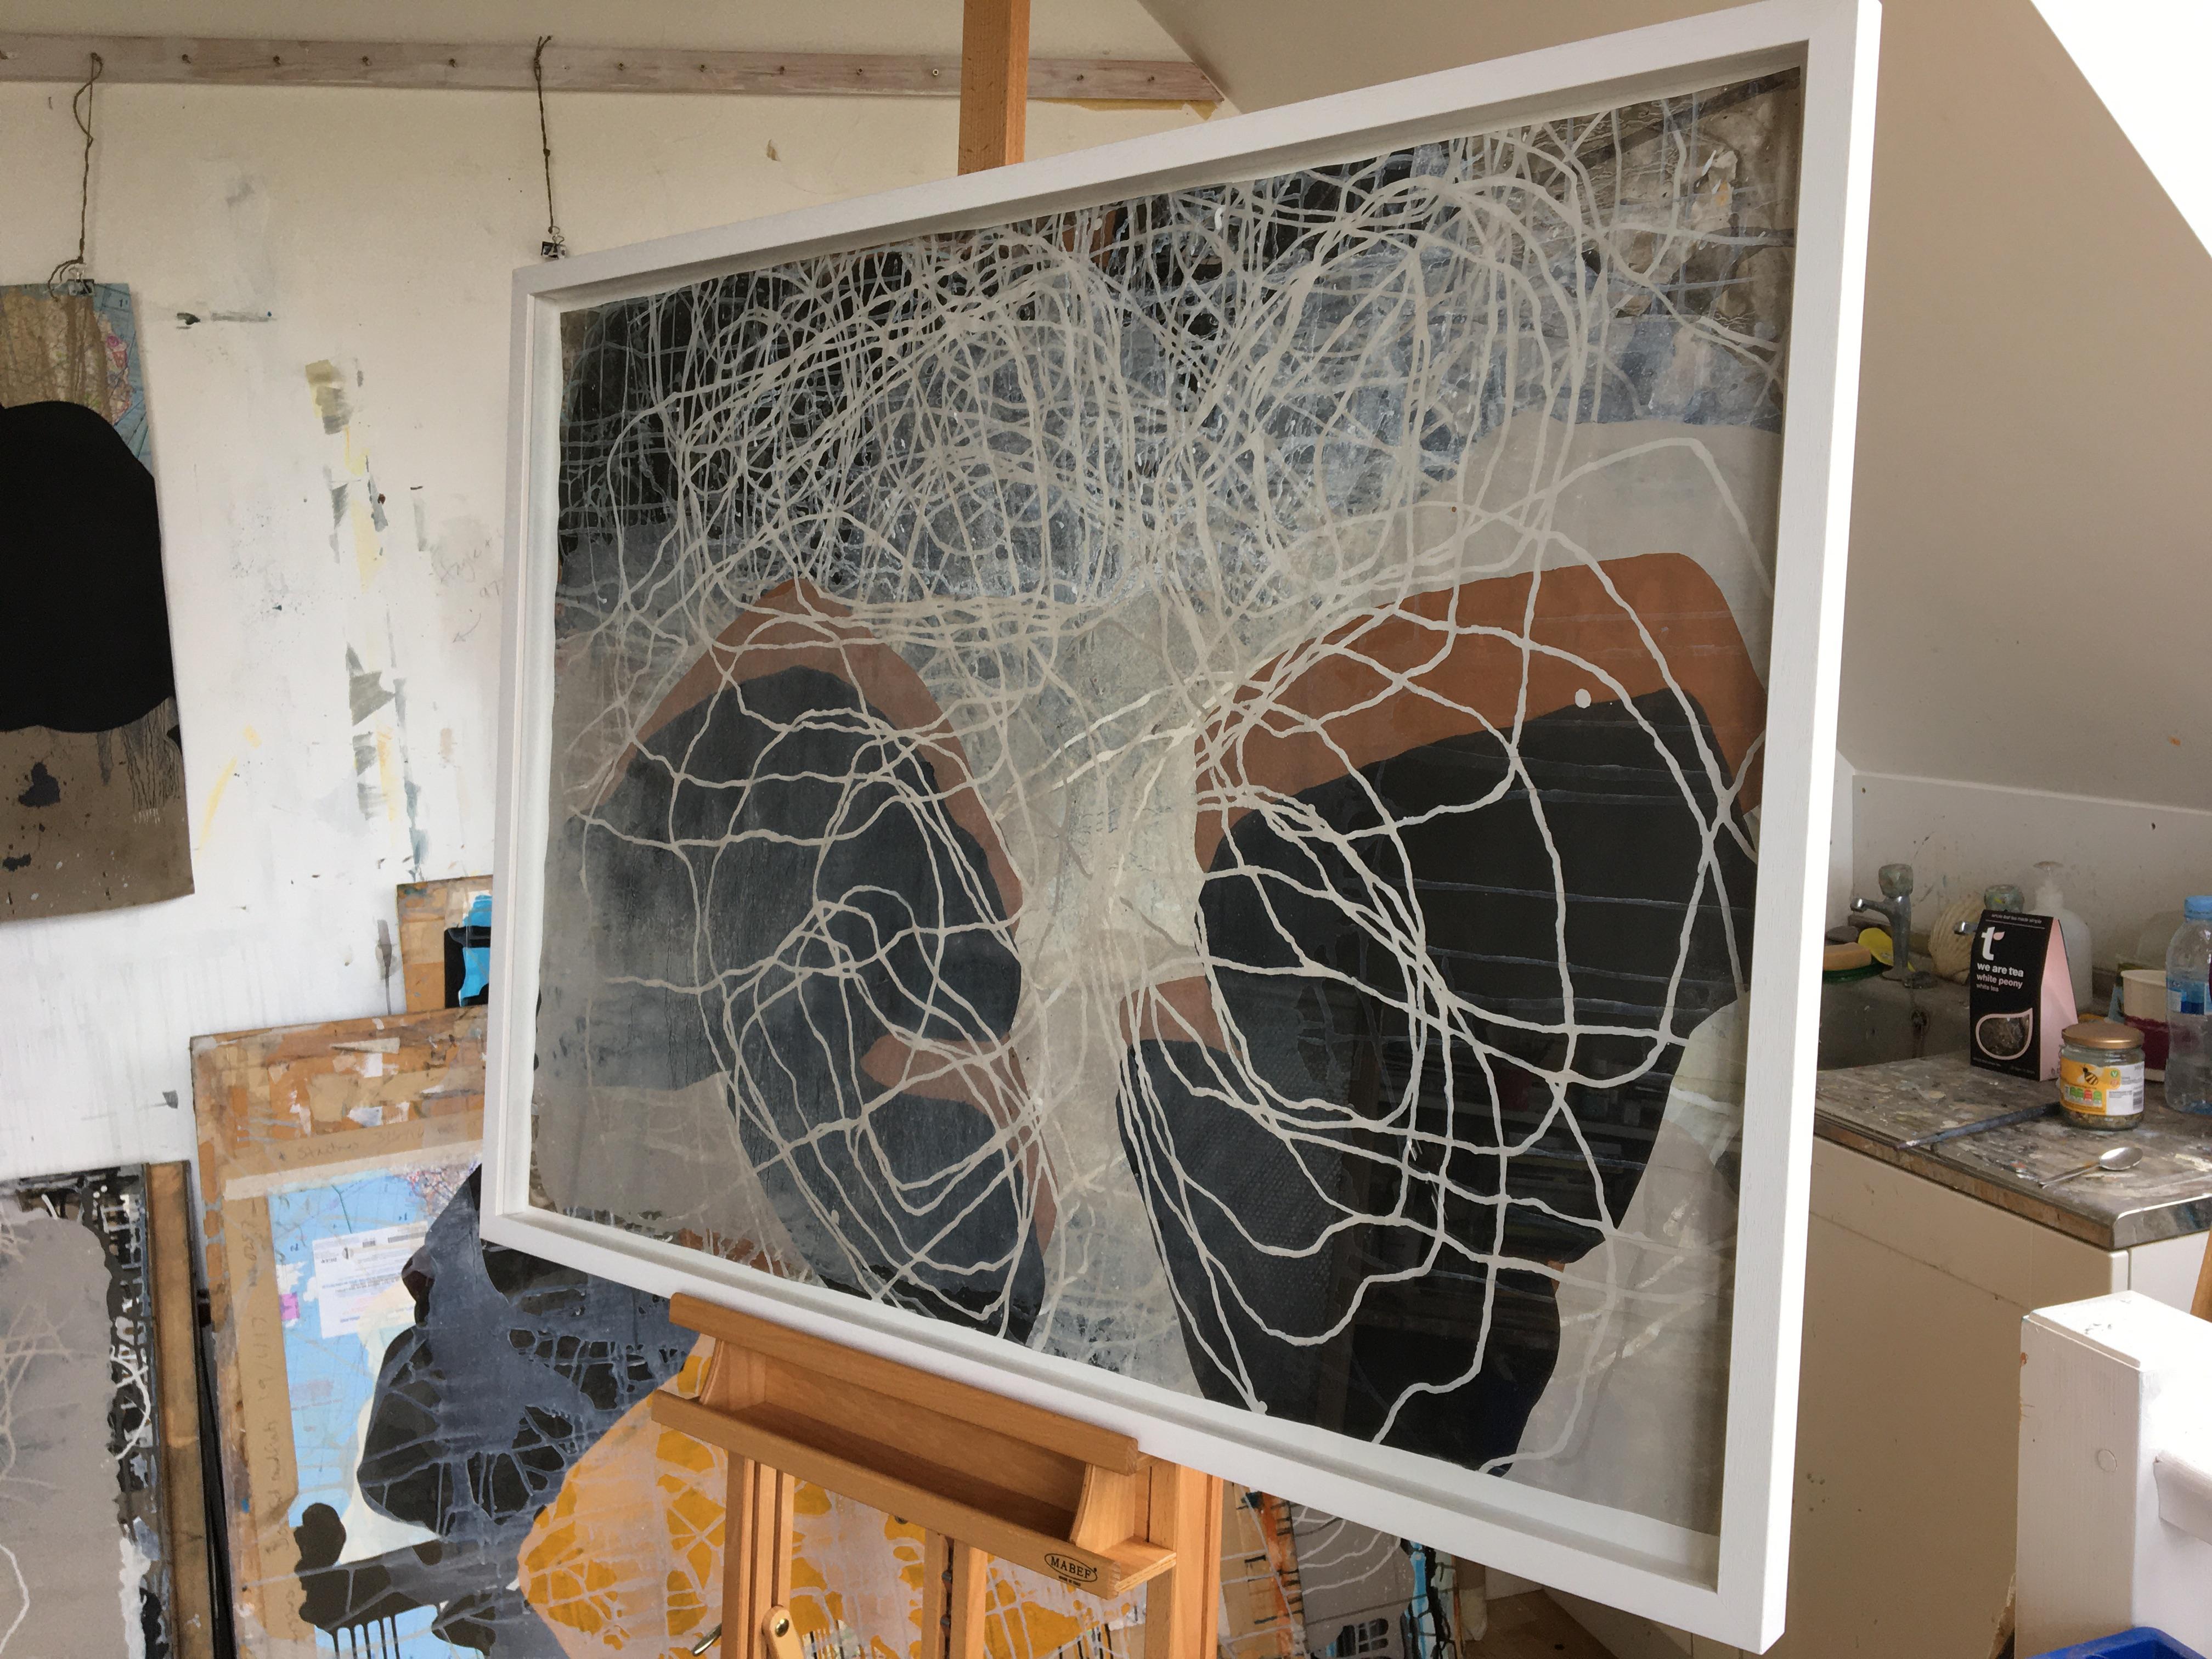 Sara Dudman paints with very gestural mark making, and this painting is part of her body of work which interprets the fascinating interactions and relationships between nature in the landscape, both in the air and on the ground.  This work has been